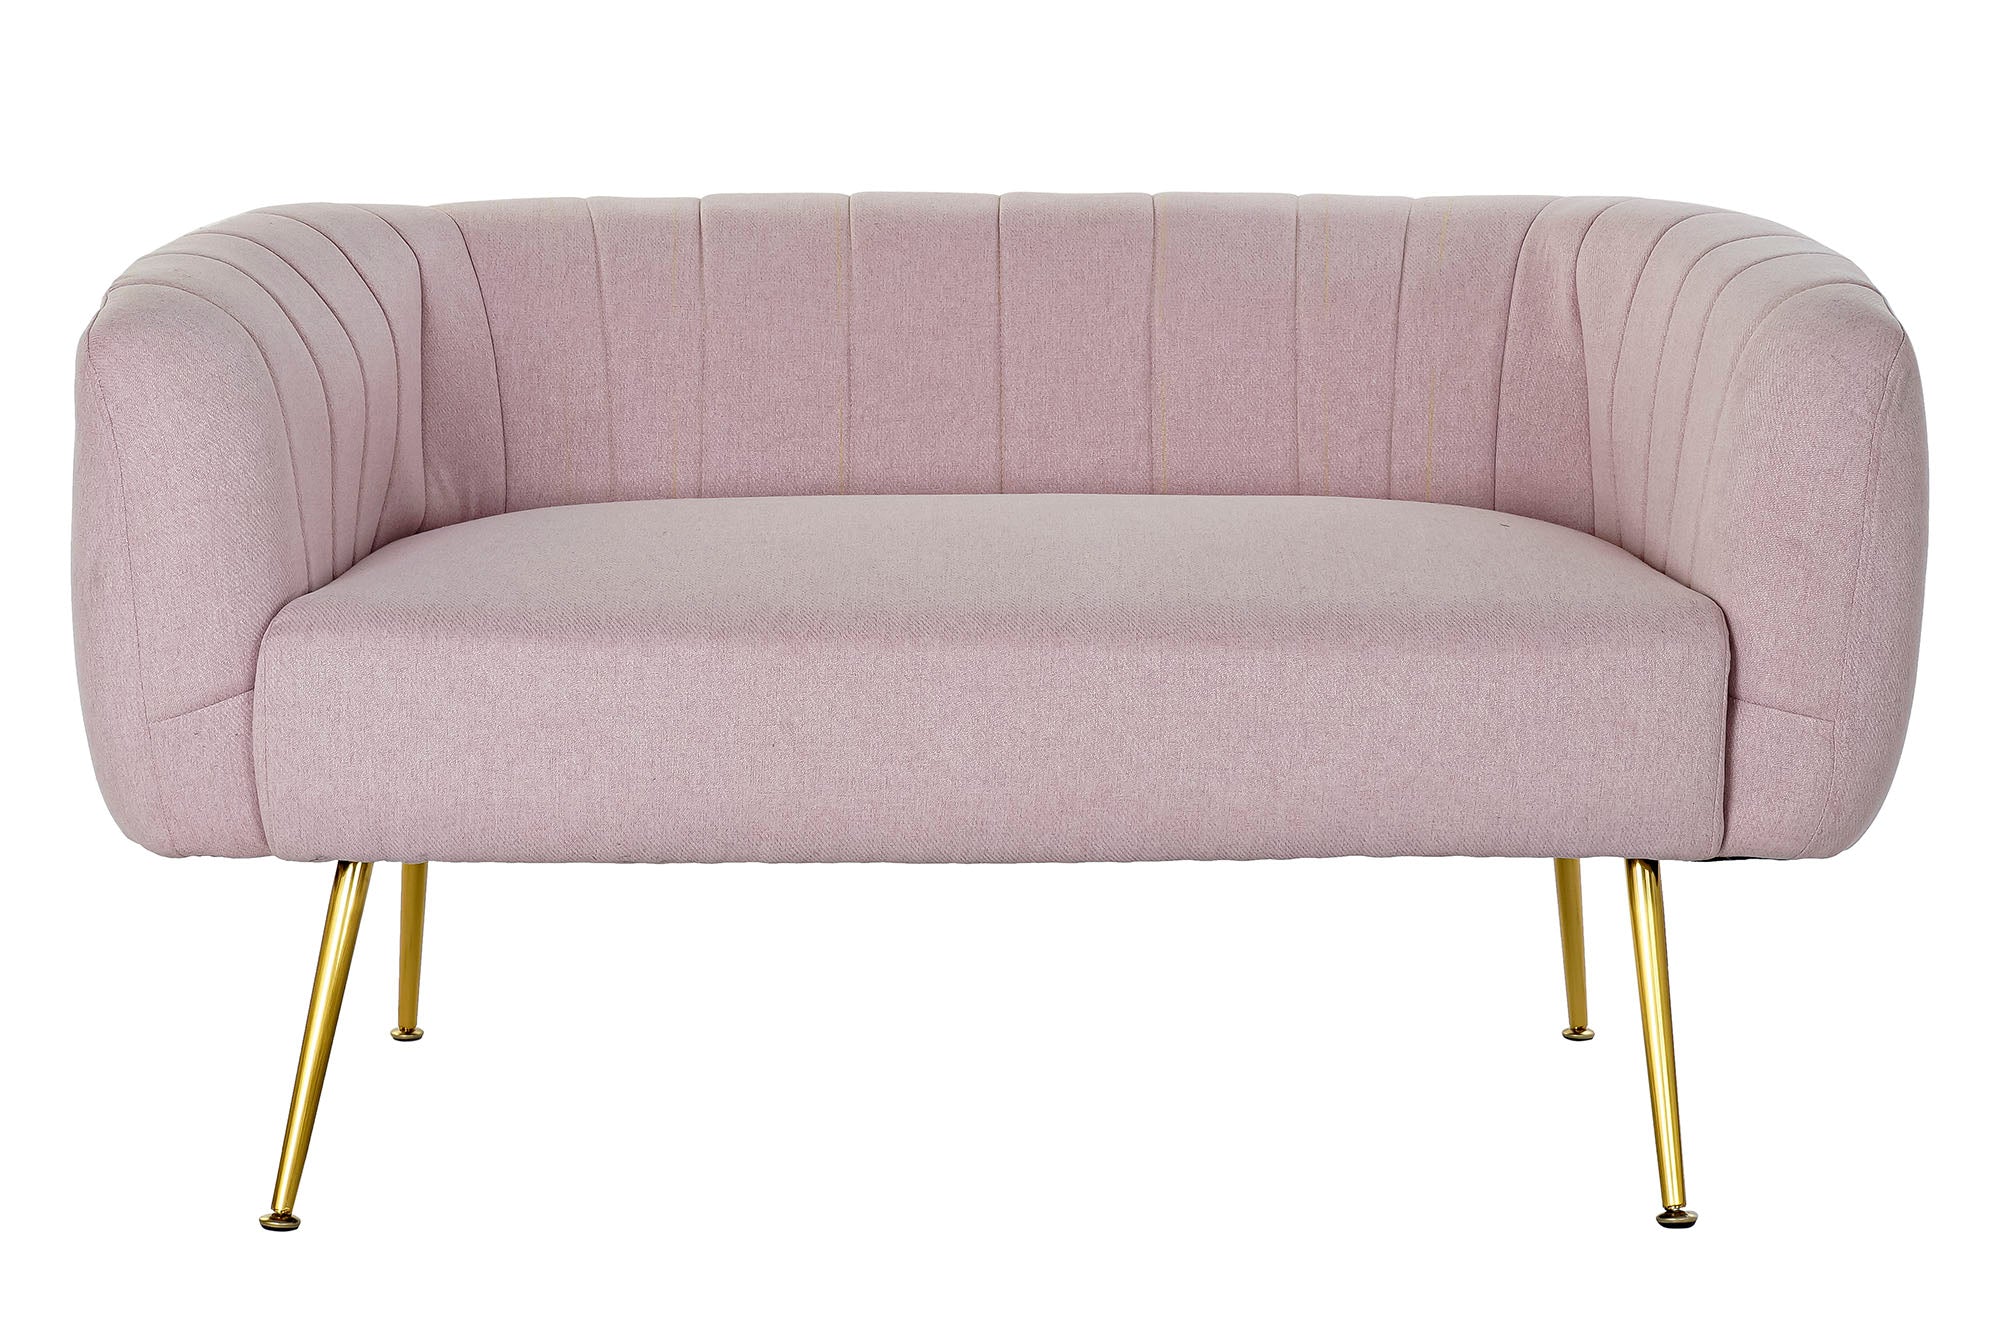 Contemporary Sofa Pink and Gold Metal Home Decor